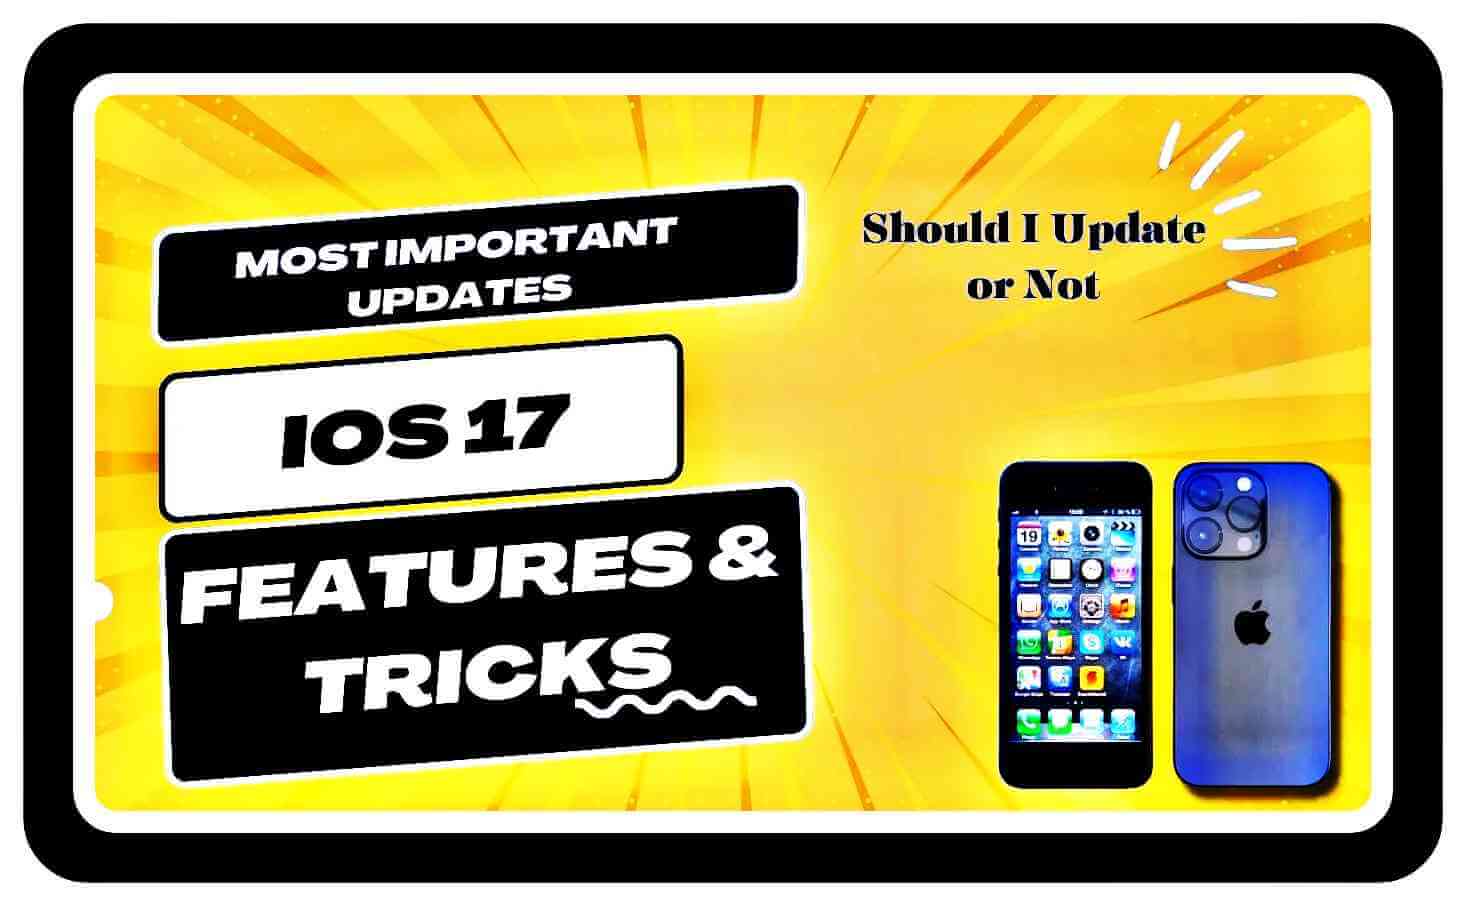 most important updates of iOS 17